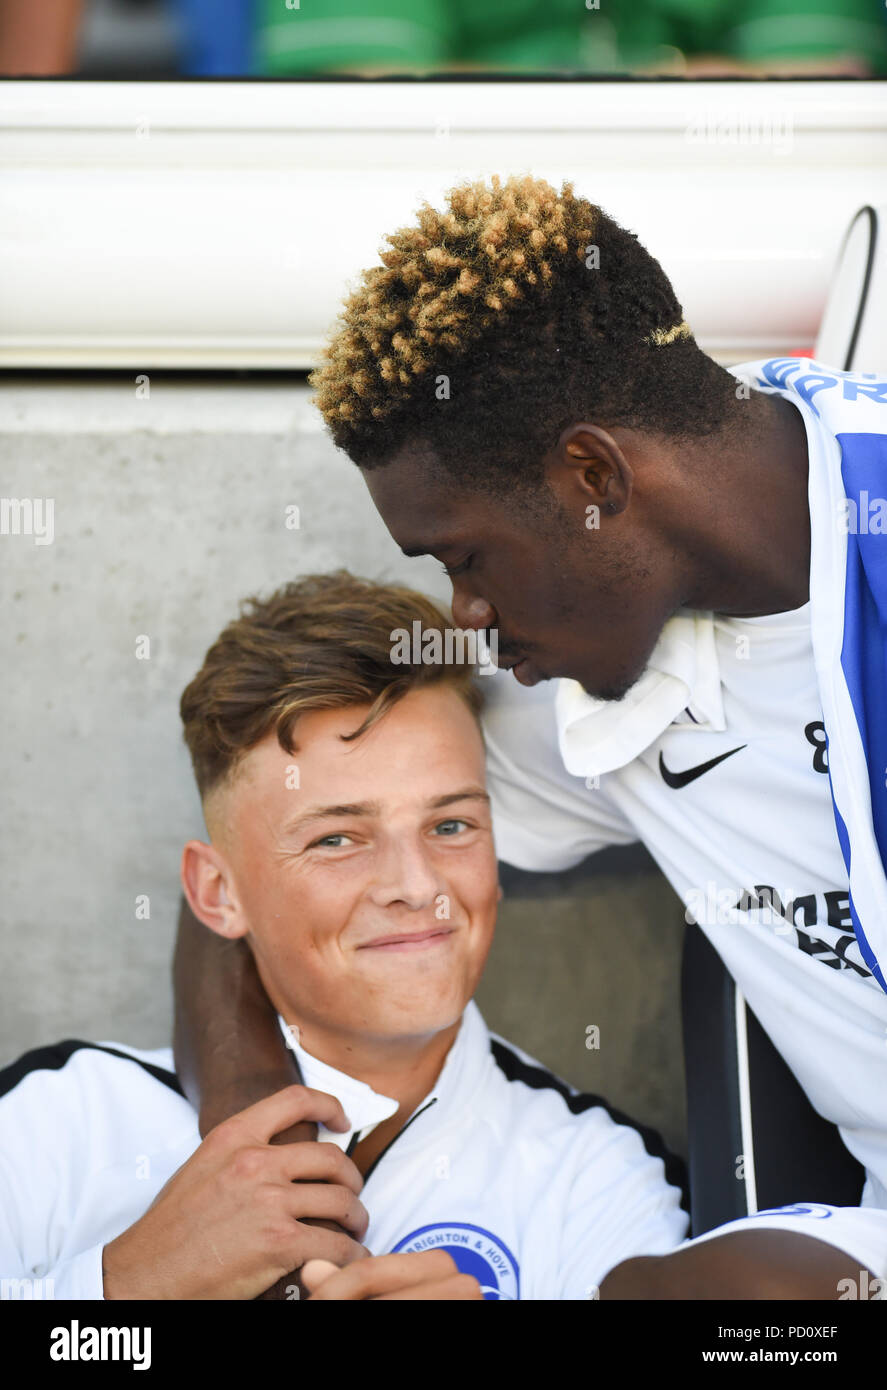 Brighton UK 3rd August 2018 -  Yves Bissouma of Brighton jokes with Ben White during the pre season friendly football match between  Brighton and Hove Albion  and Nantes at the American Express Community Stadium - Photo Simon Dack / Telephoto Images Editorial use only. No merchandising. For Football images FA and Premier League restrictions apply inc. no internet/mobile usage without FAPL license - for details contact Football Dataco Stock Photo